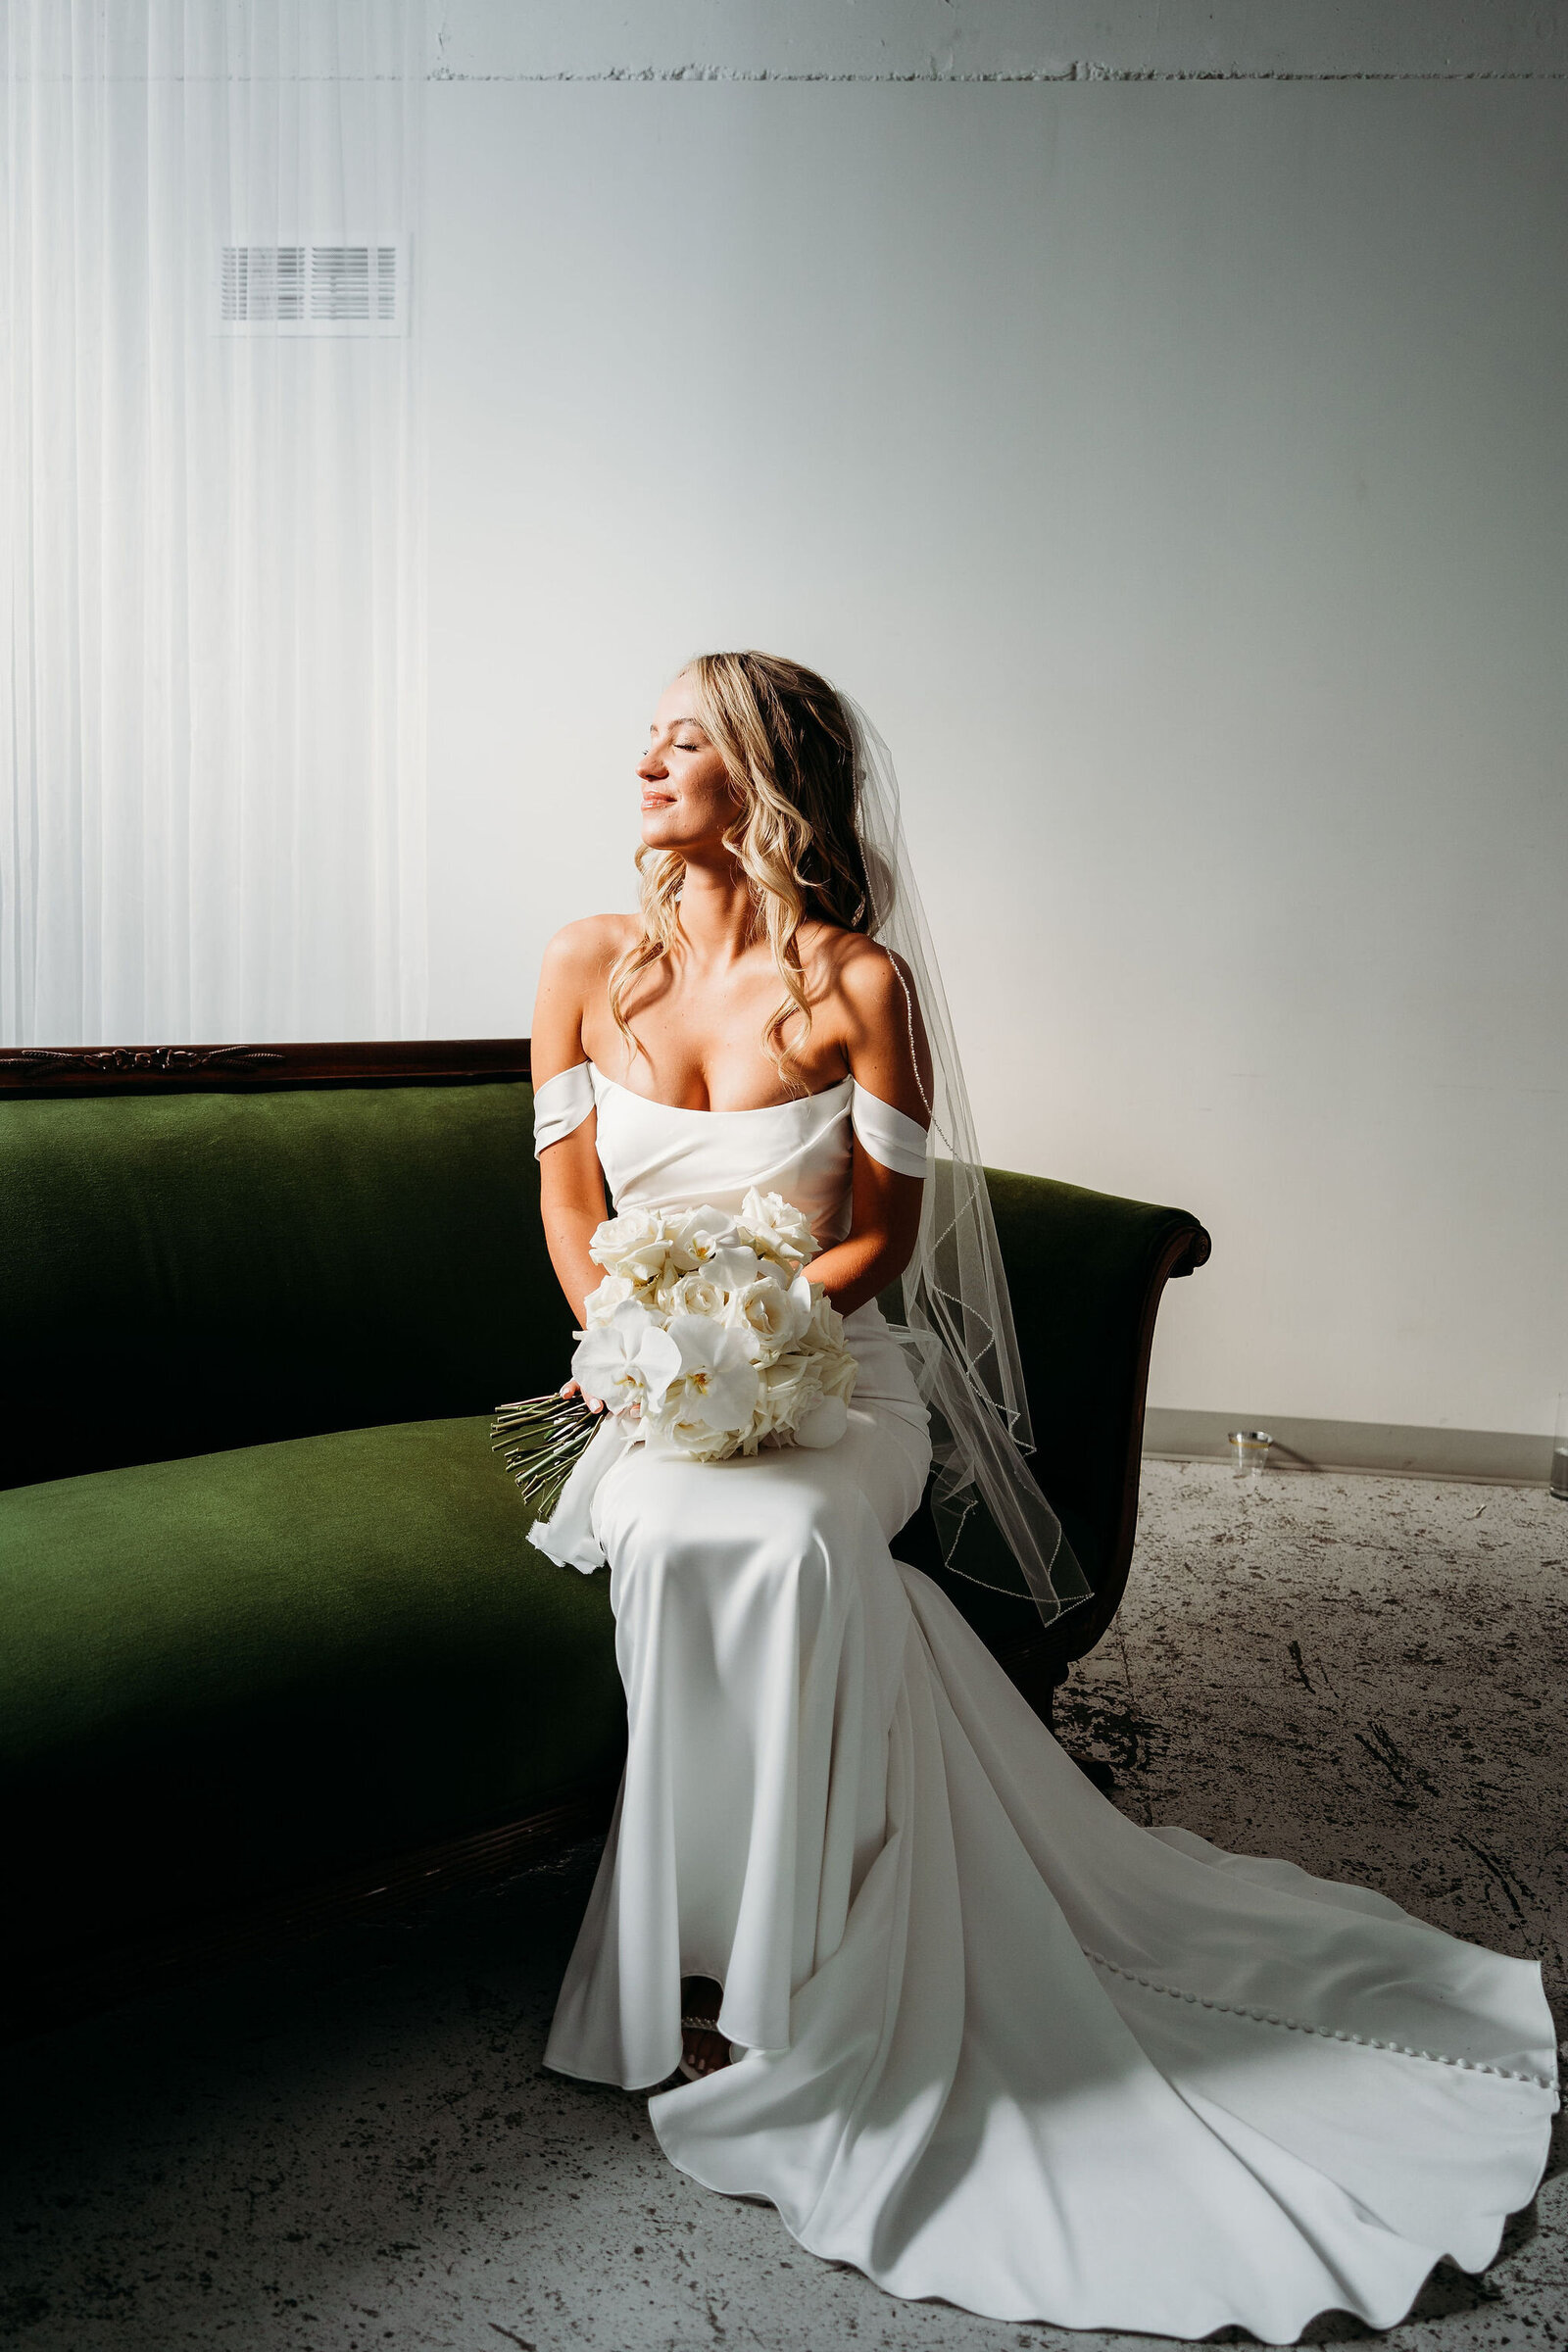 Bridal portraits on a green couch at the St Vrain, Longmont wedding venue